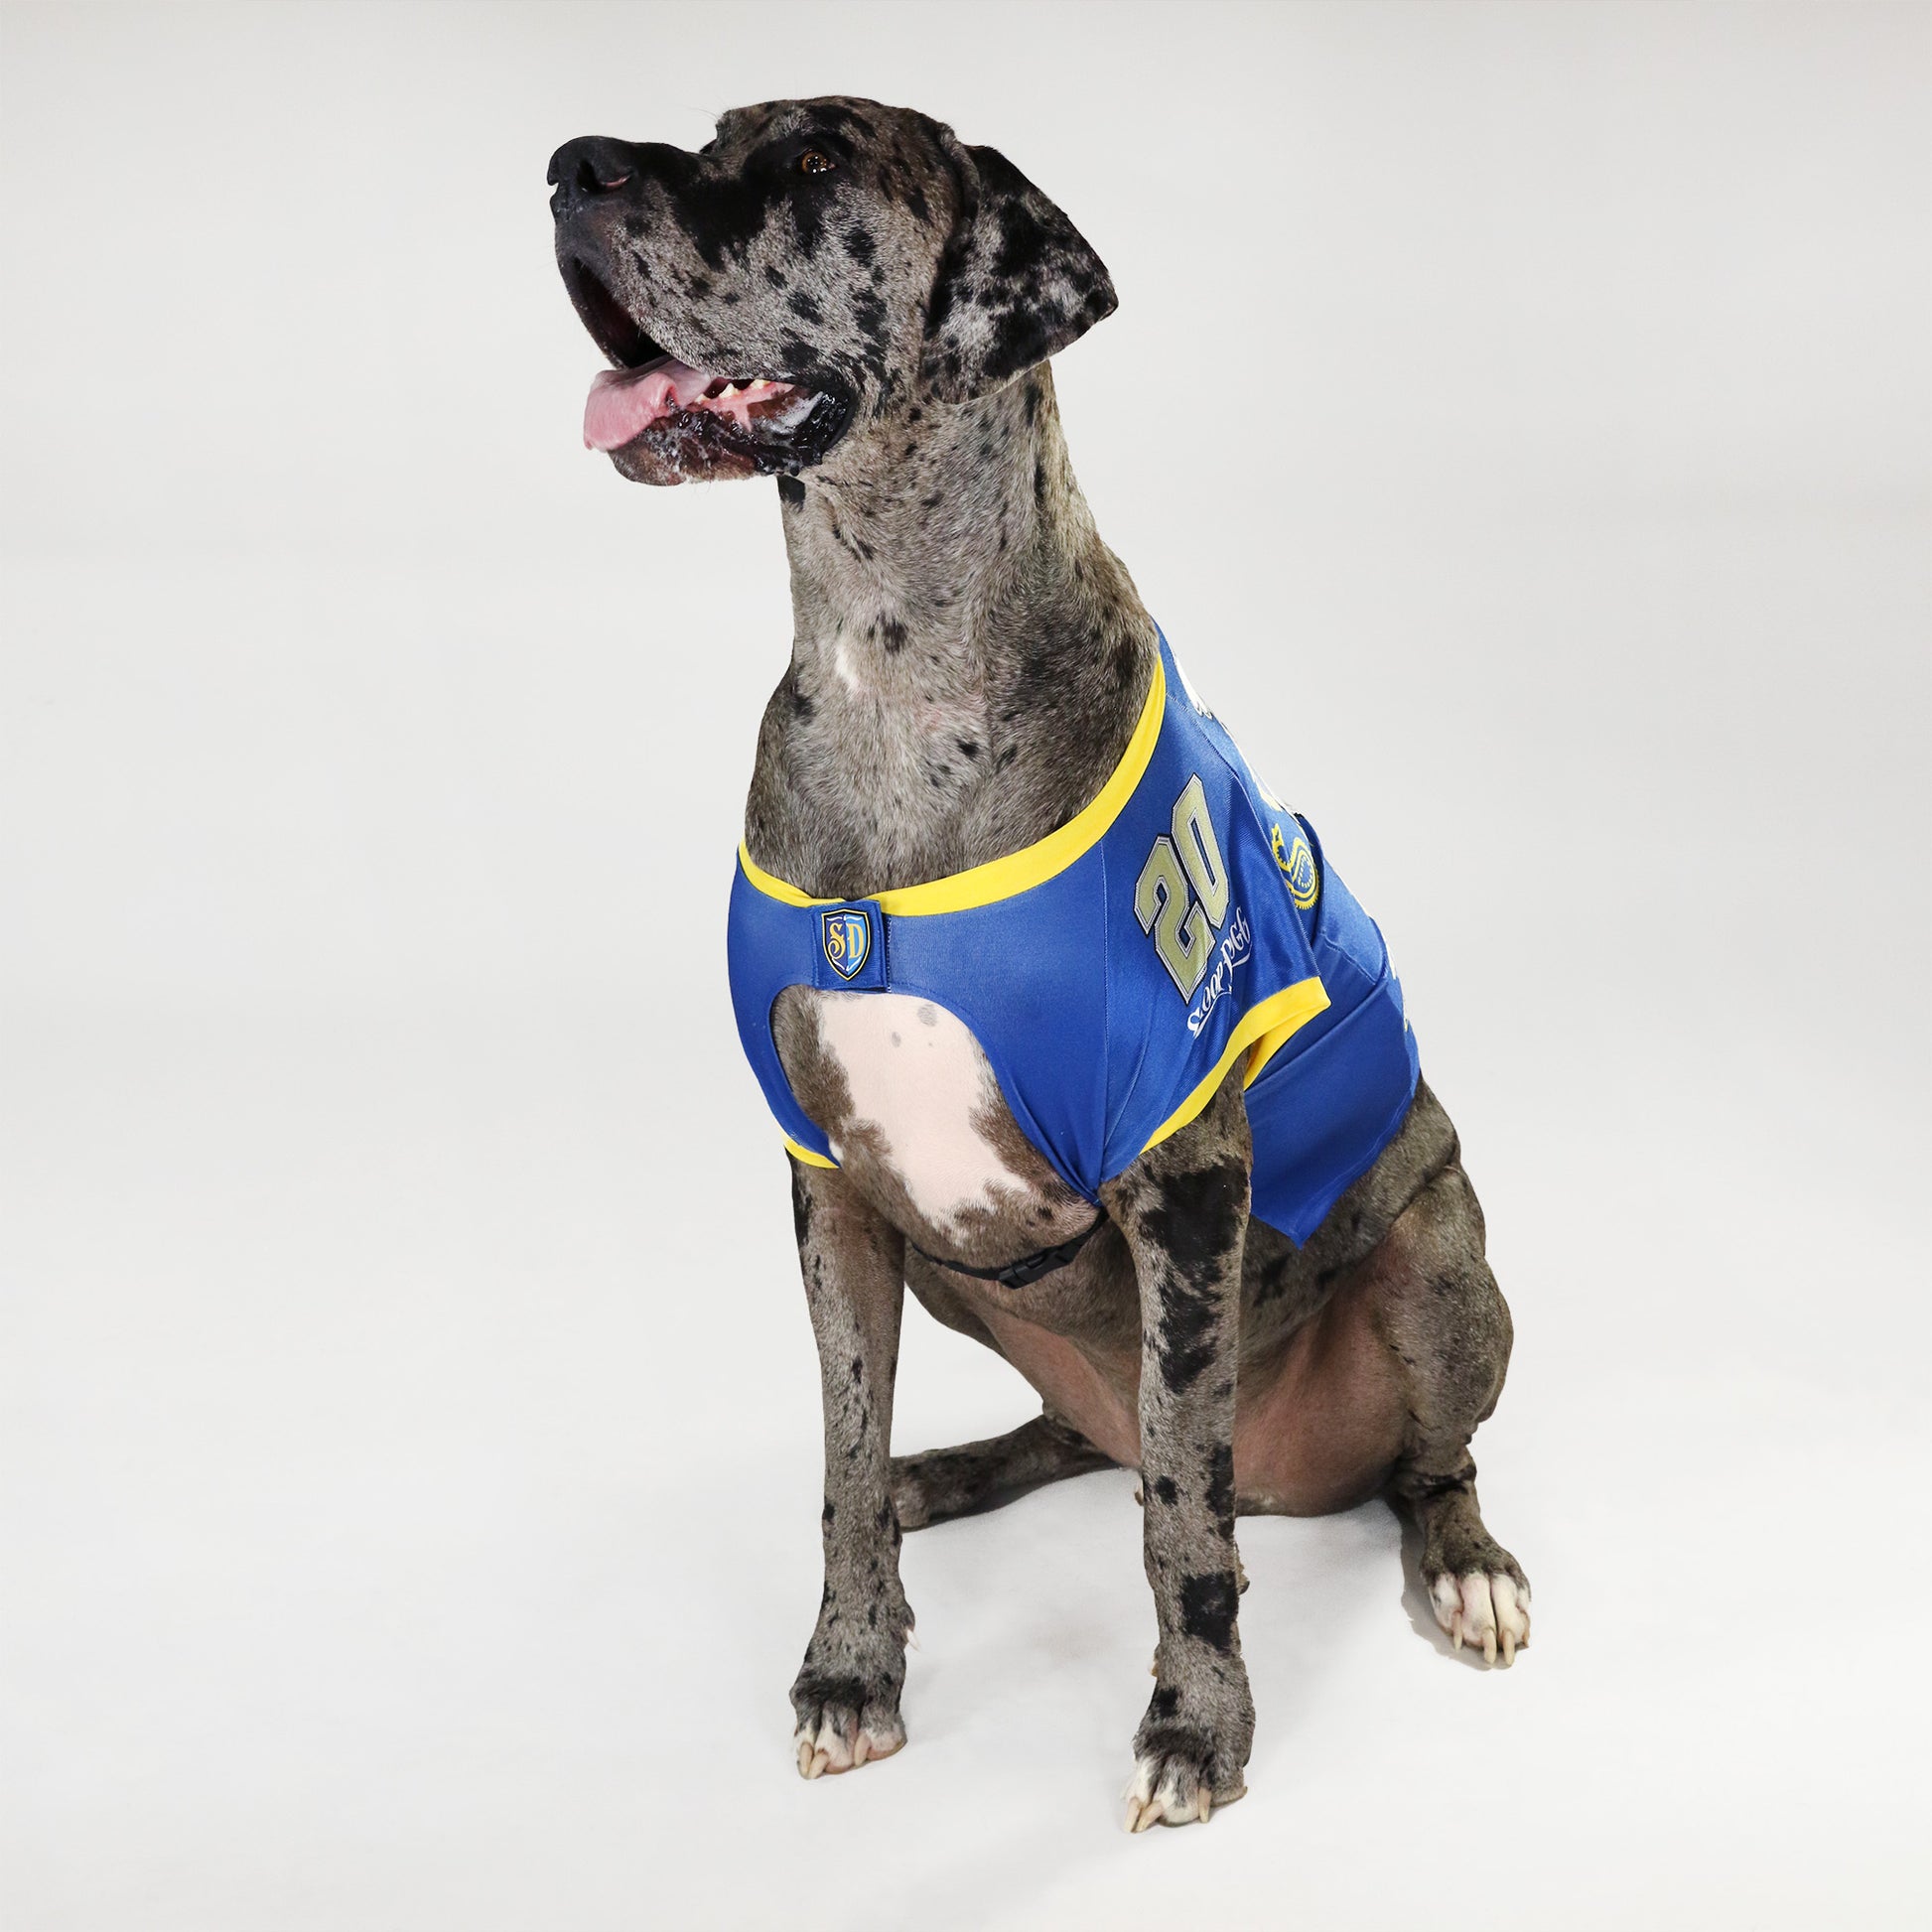 Rookie the Great Dane wearing the Halftime Deluxe Pet Jersey in size Big.